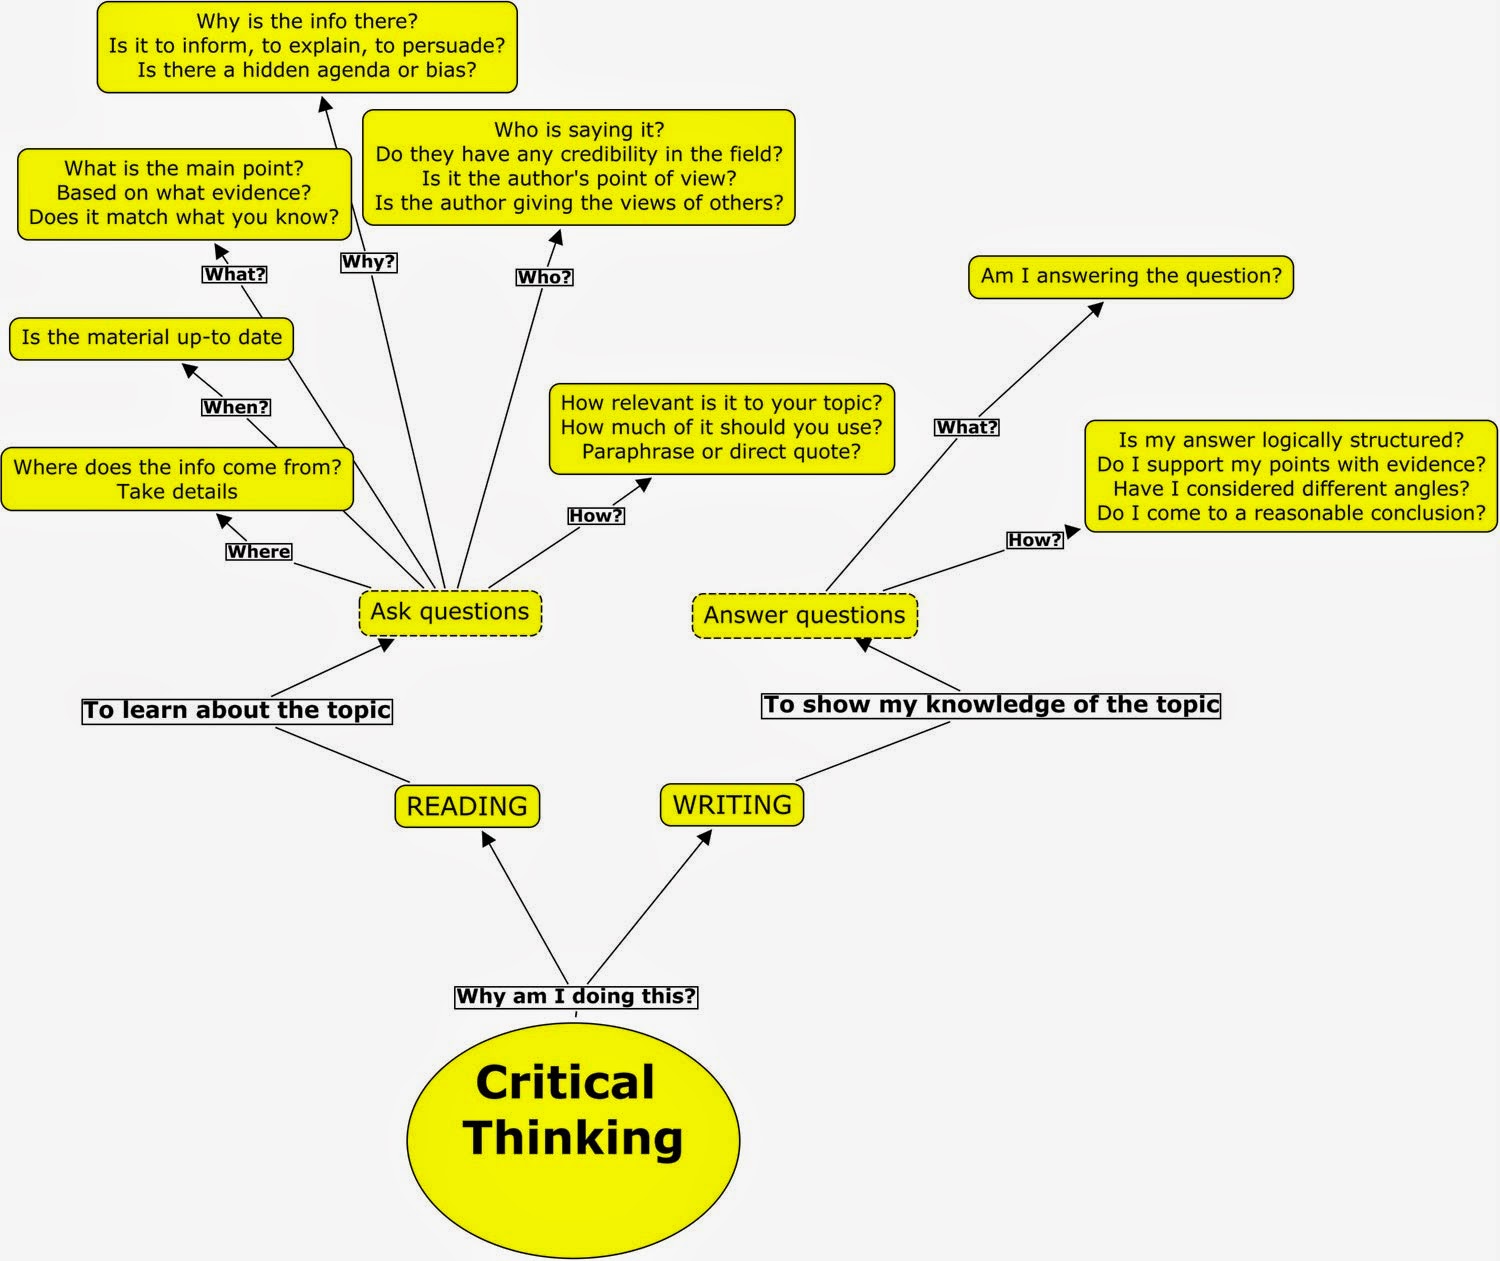 Discuss the concept of critical thinking